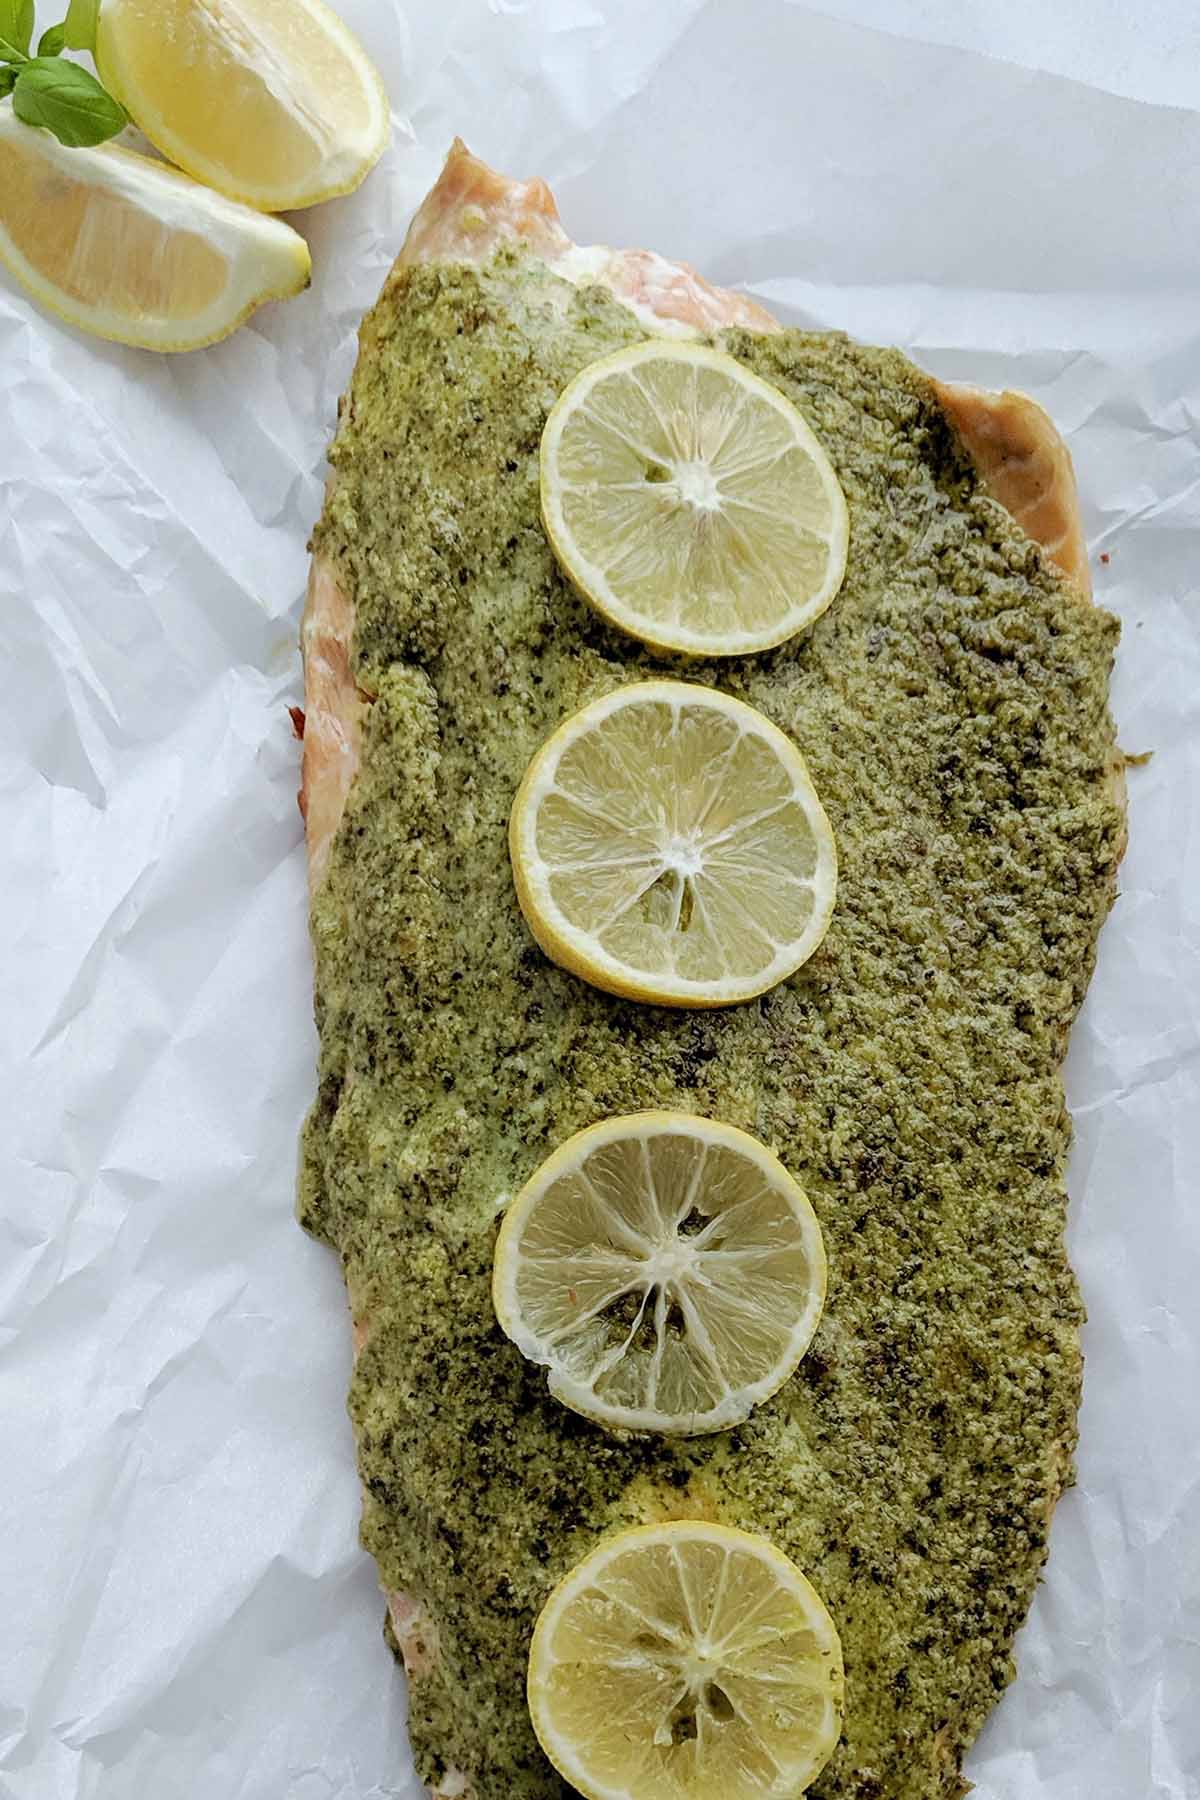 cooked salmon filet with green herb sauce topped with lemon slices.